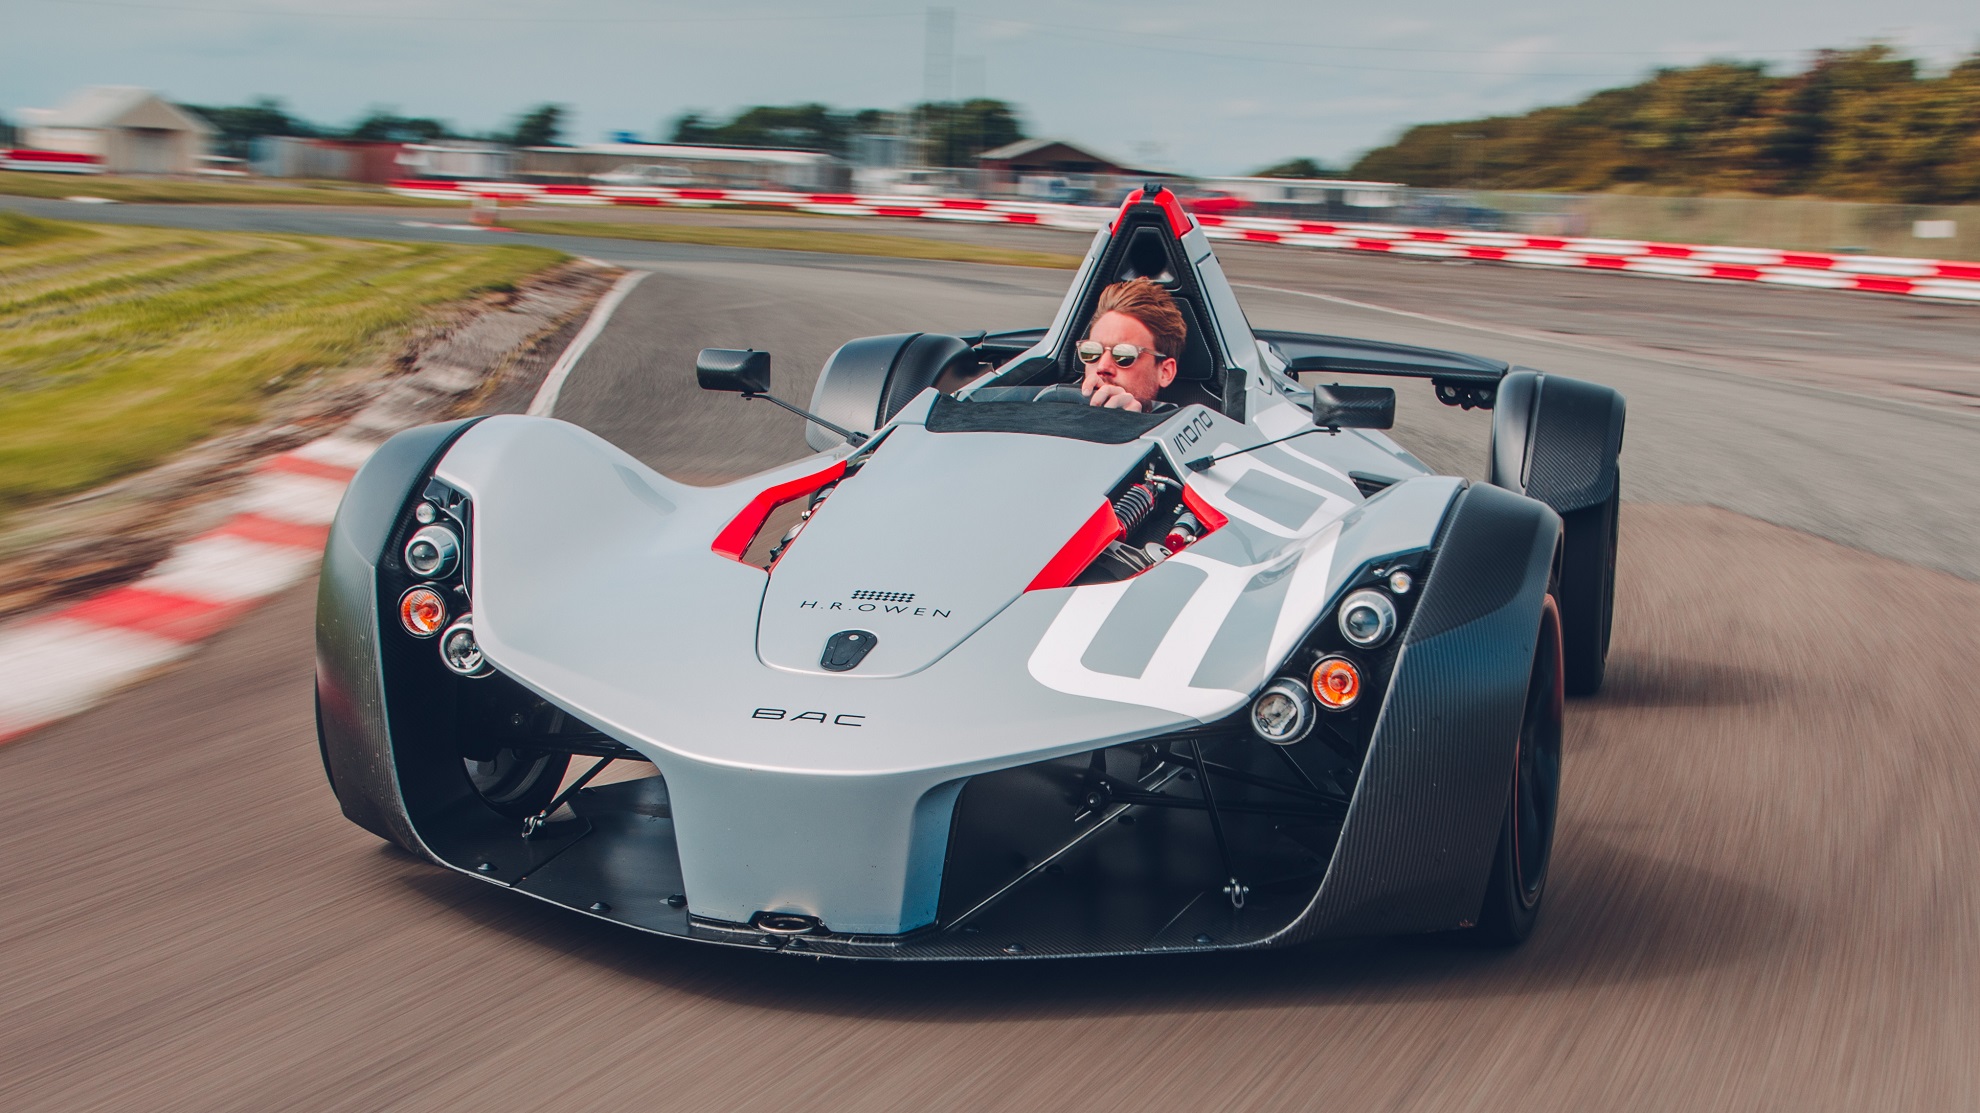 Front-angled shot of a gray BAC Mono going around a race track.